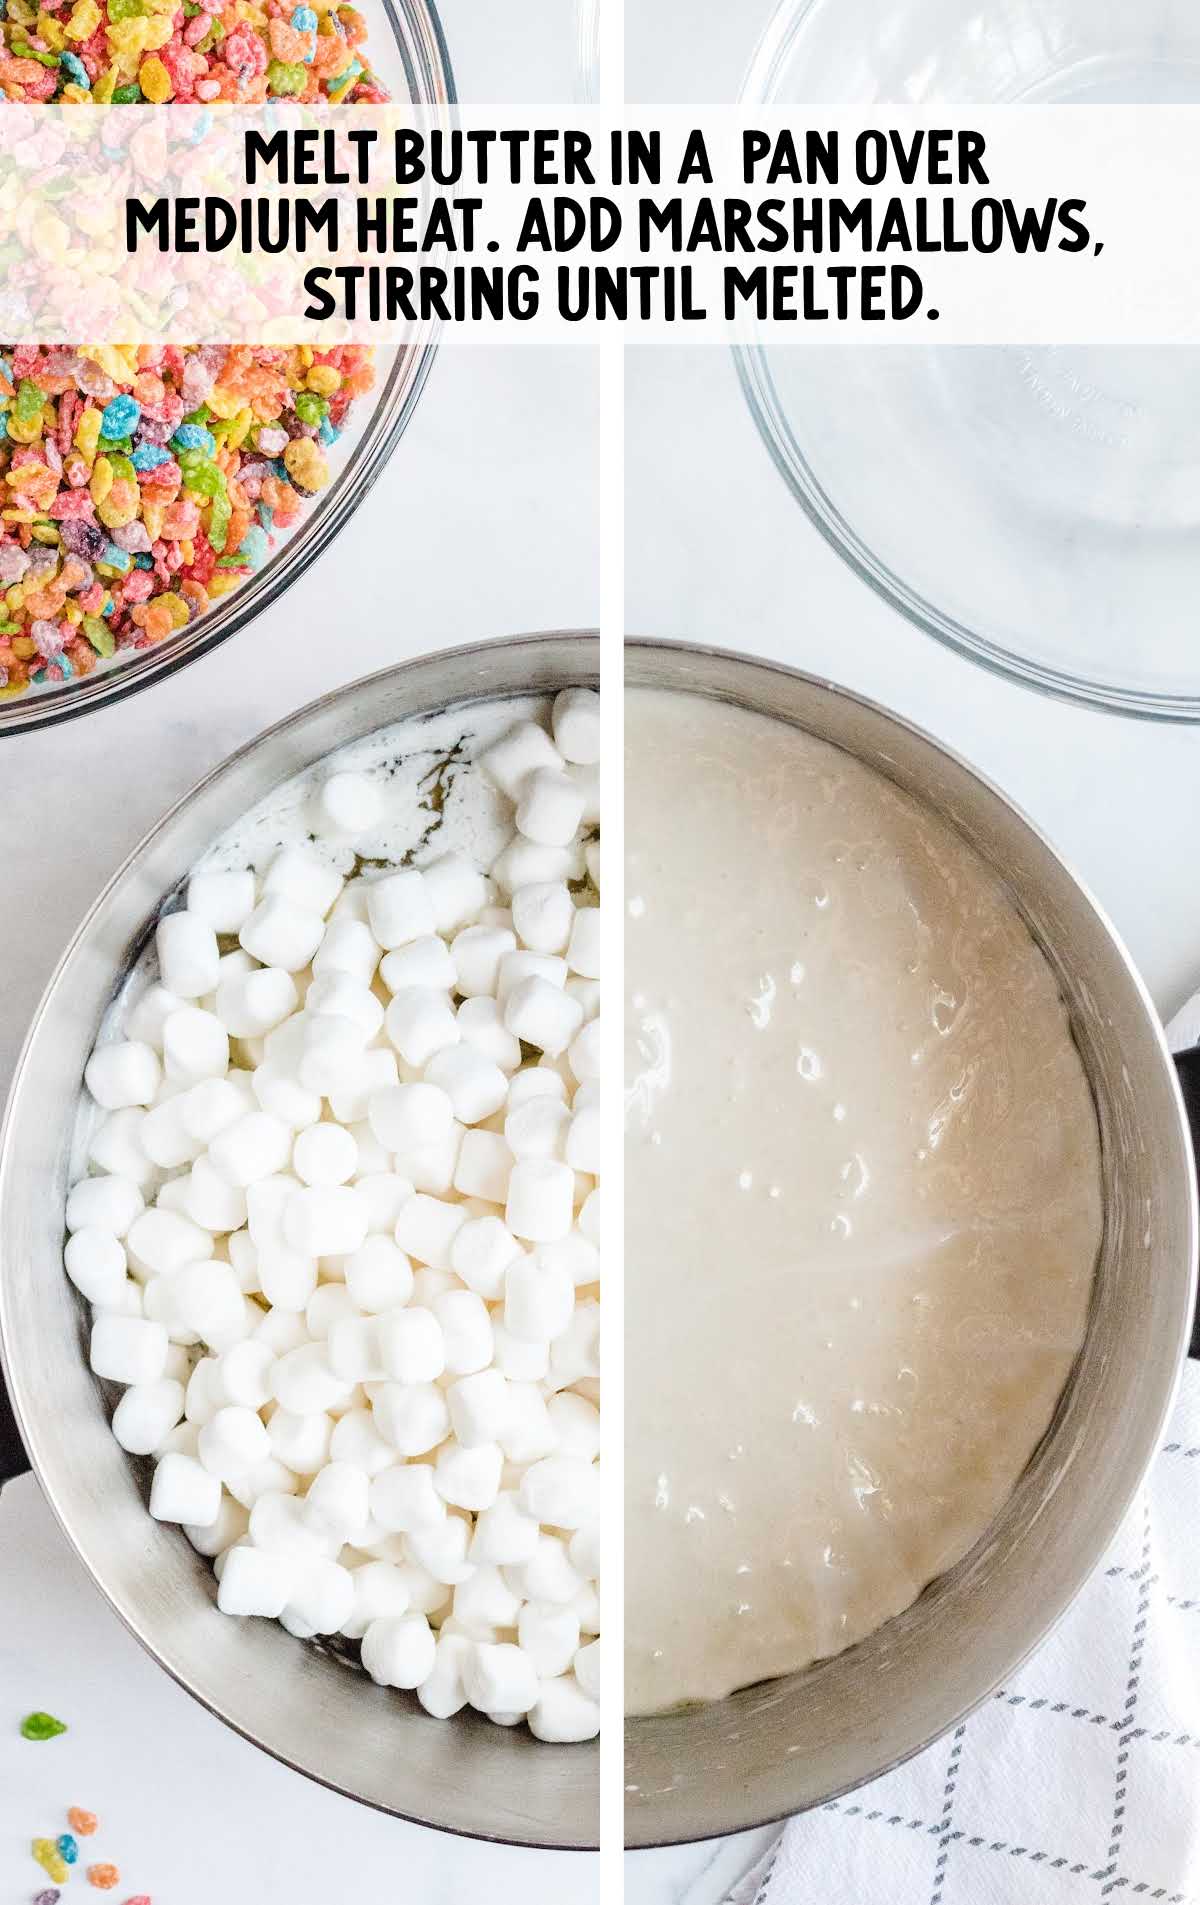 marshmallows in a pot and then melted